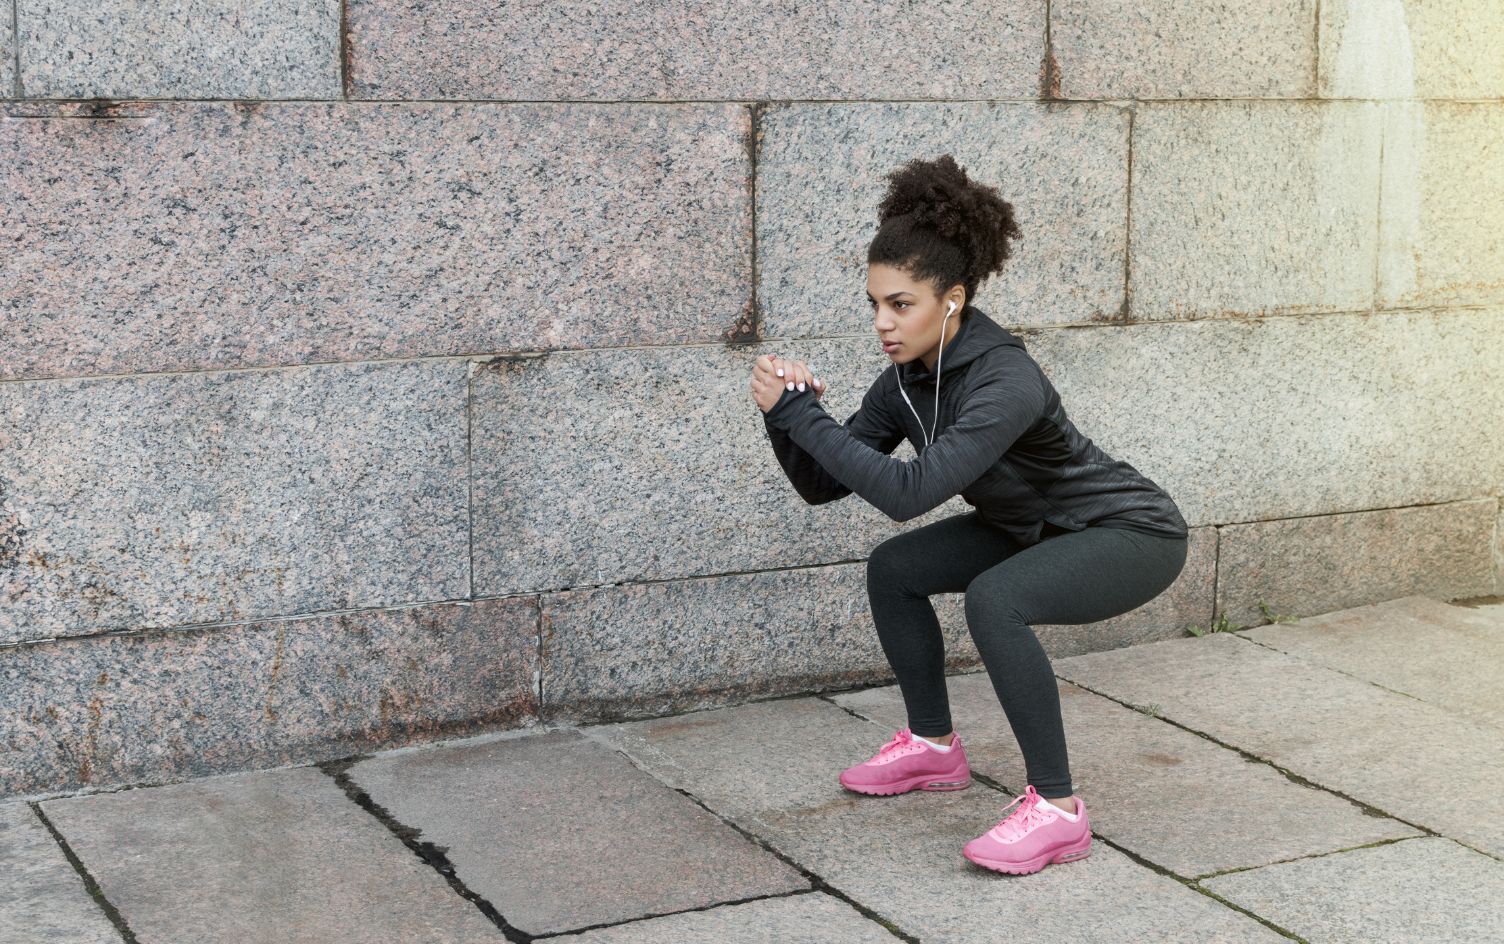 The 31-Day Squat Challenge, Lunge & Pushup Plan